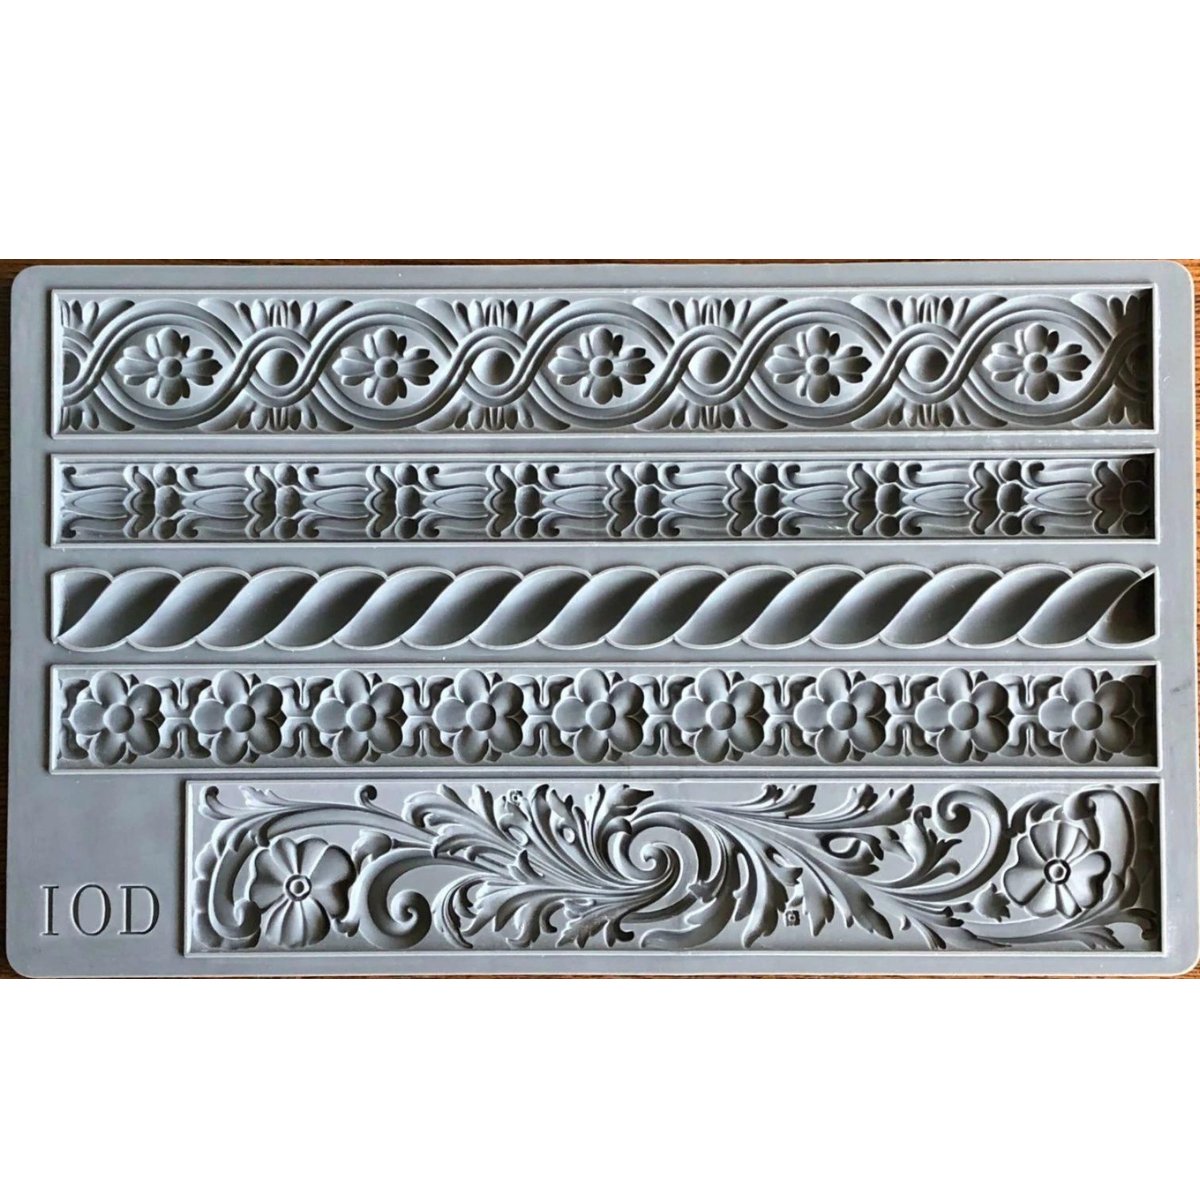 Iron Orchid Designs - Trimmings 2 Decor Mould - Rustic River Home